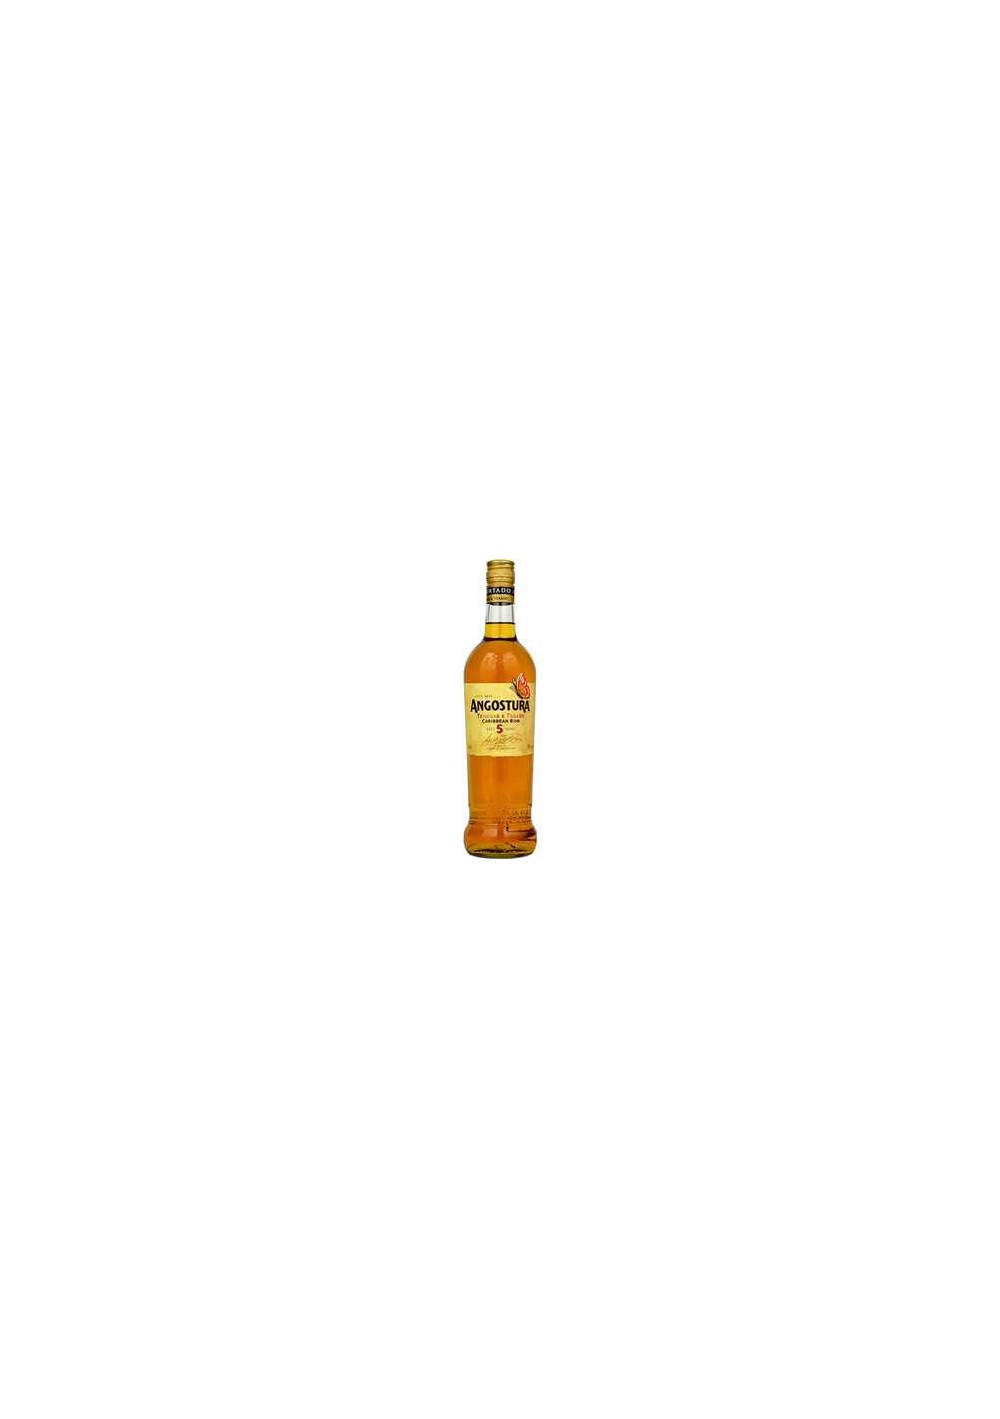 Angostura - 5 years old - Rum - (70cl)